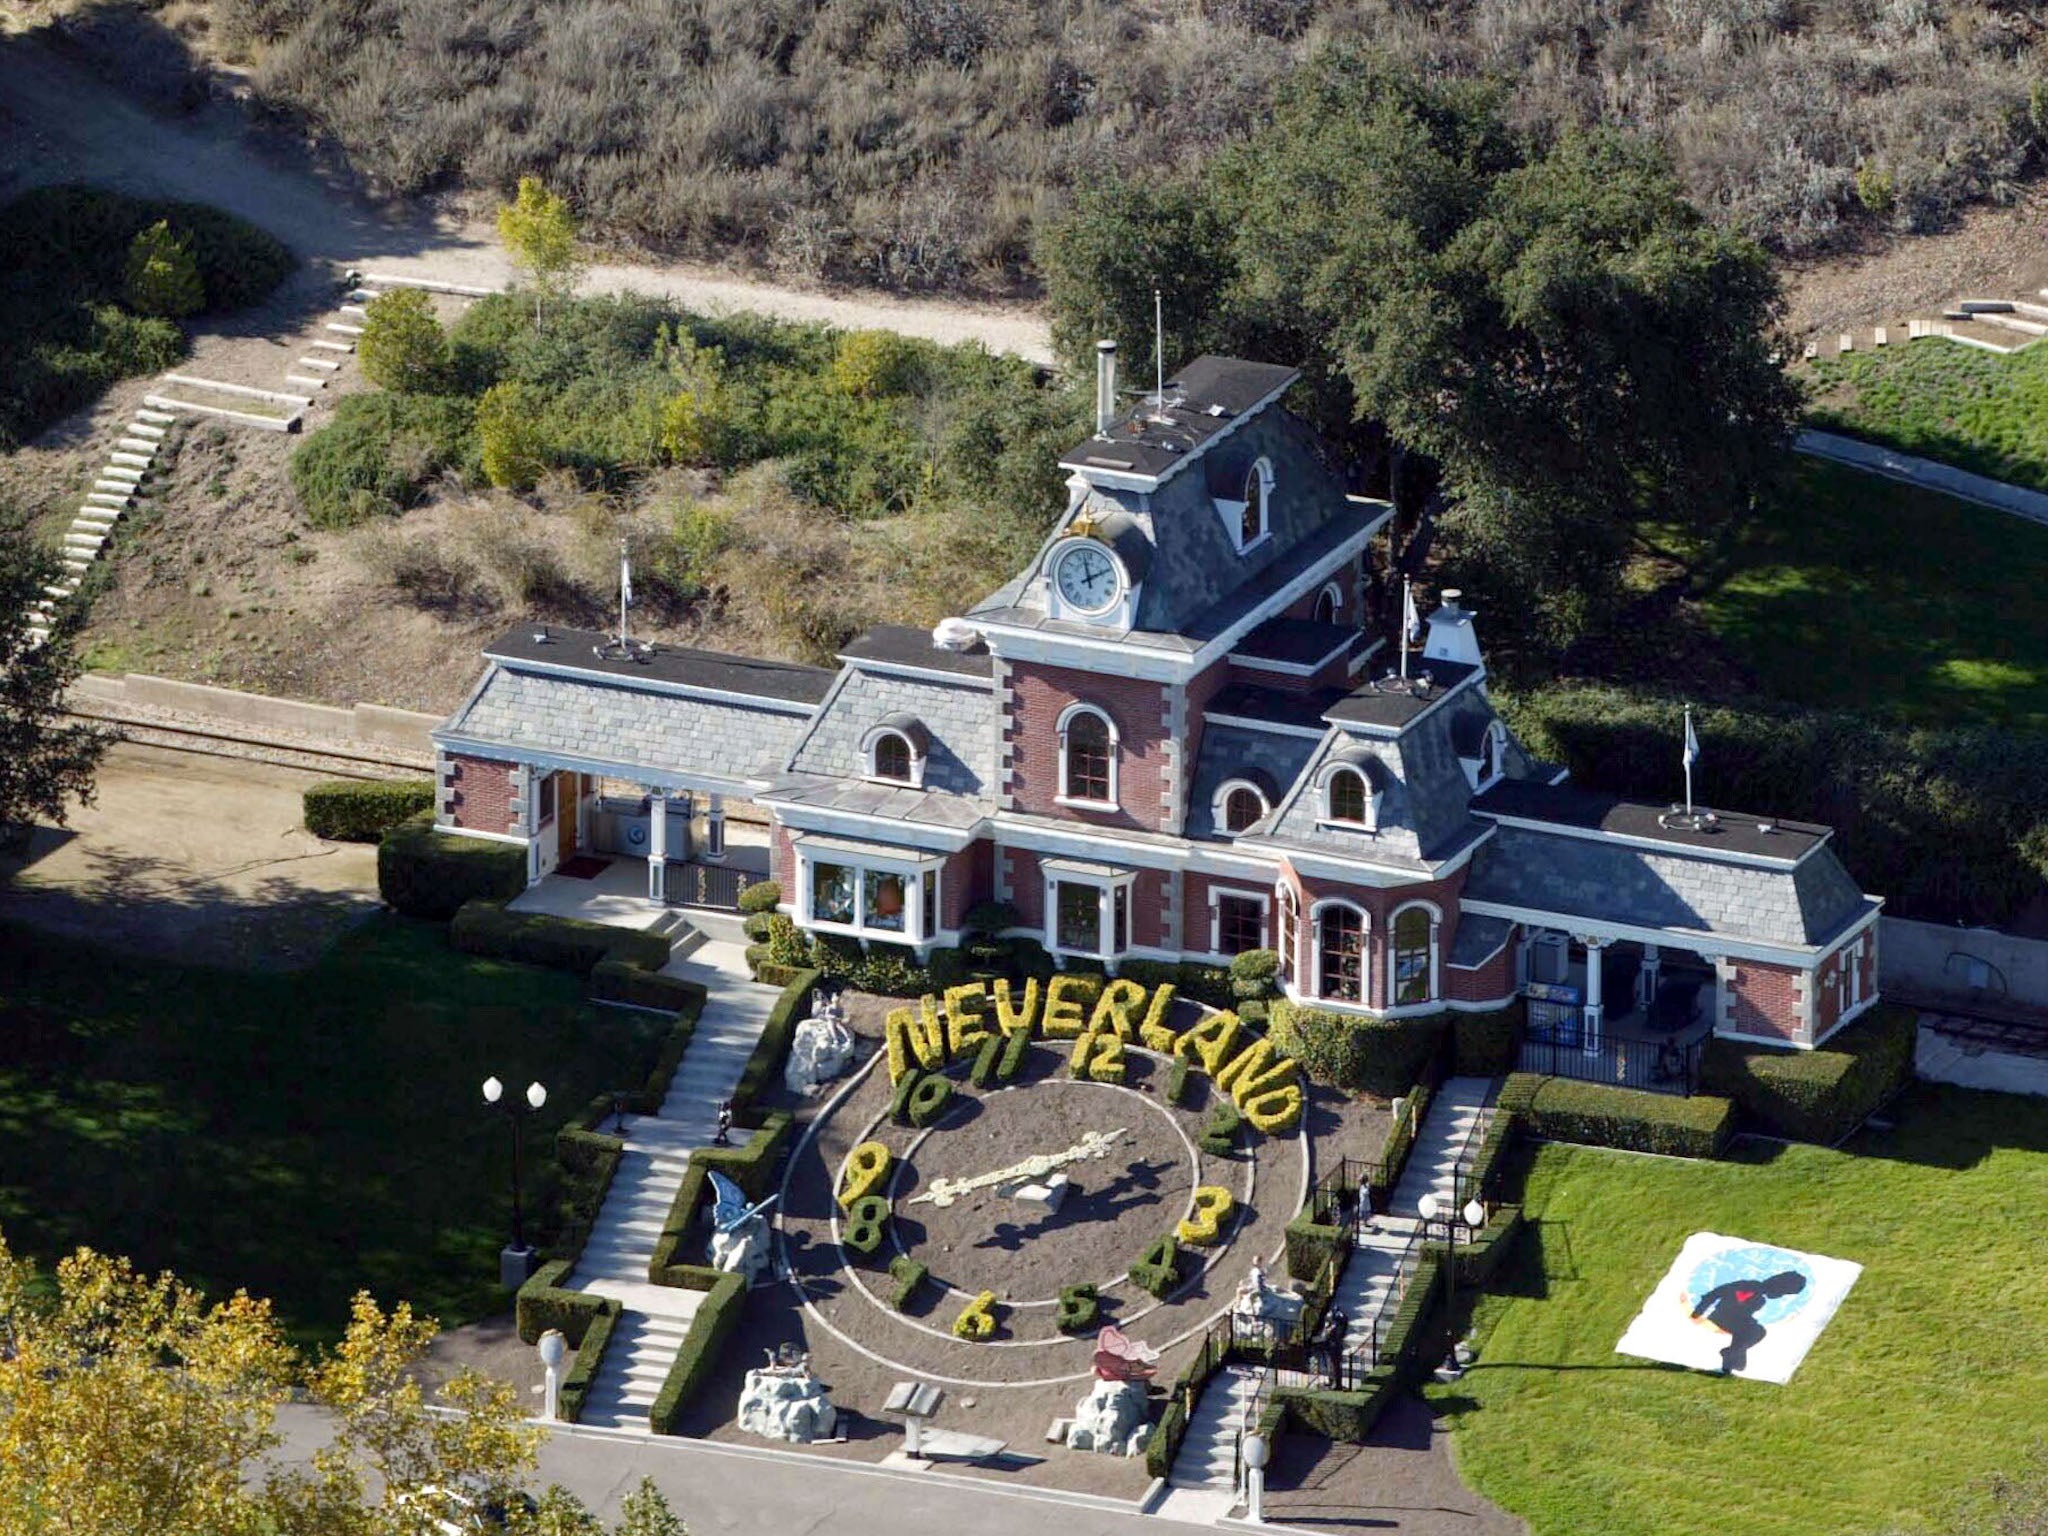 The clock feature at the train station of Jackson’s Neverland Ranch